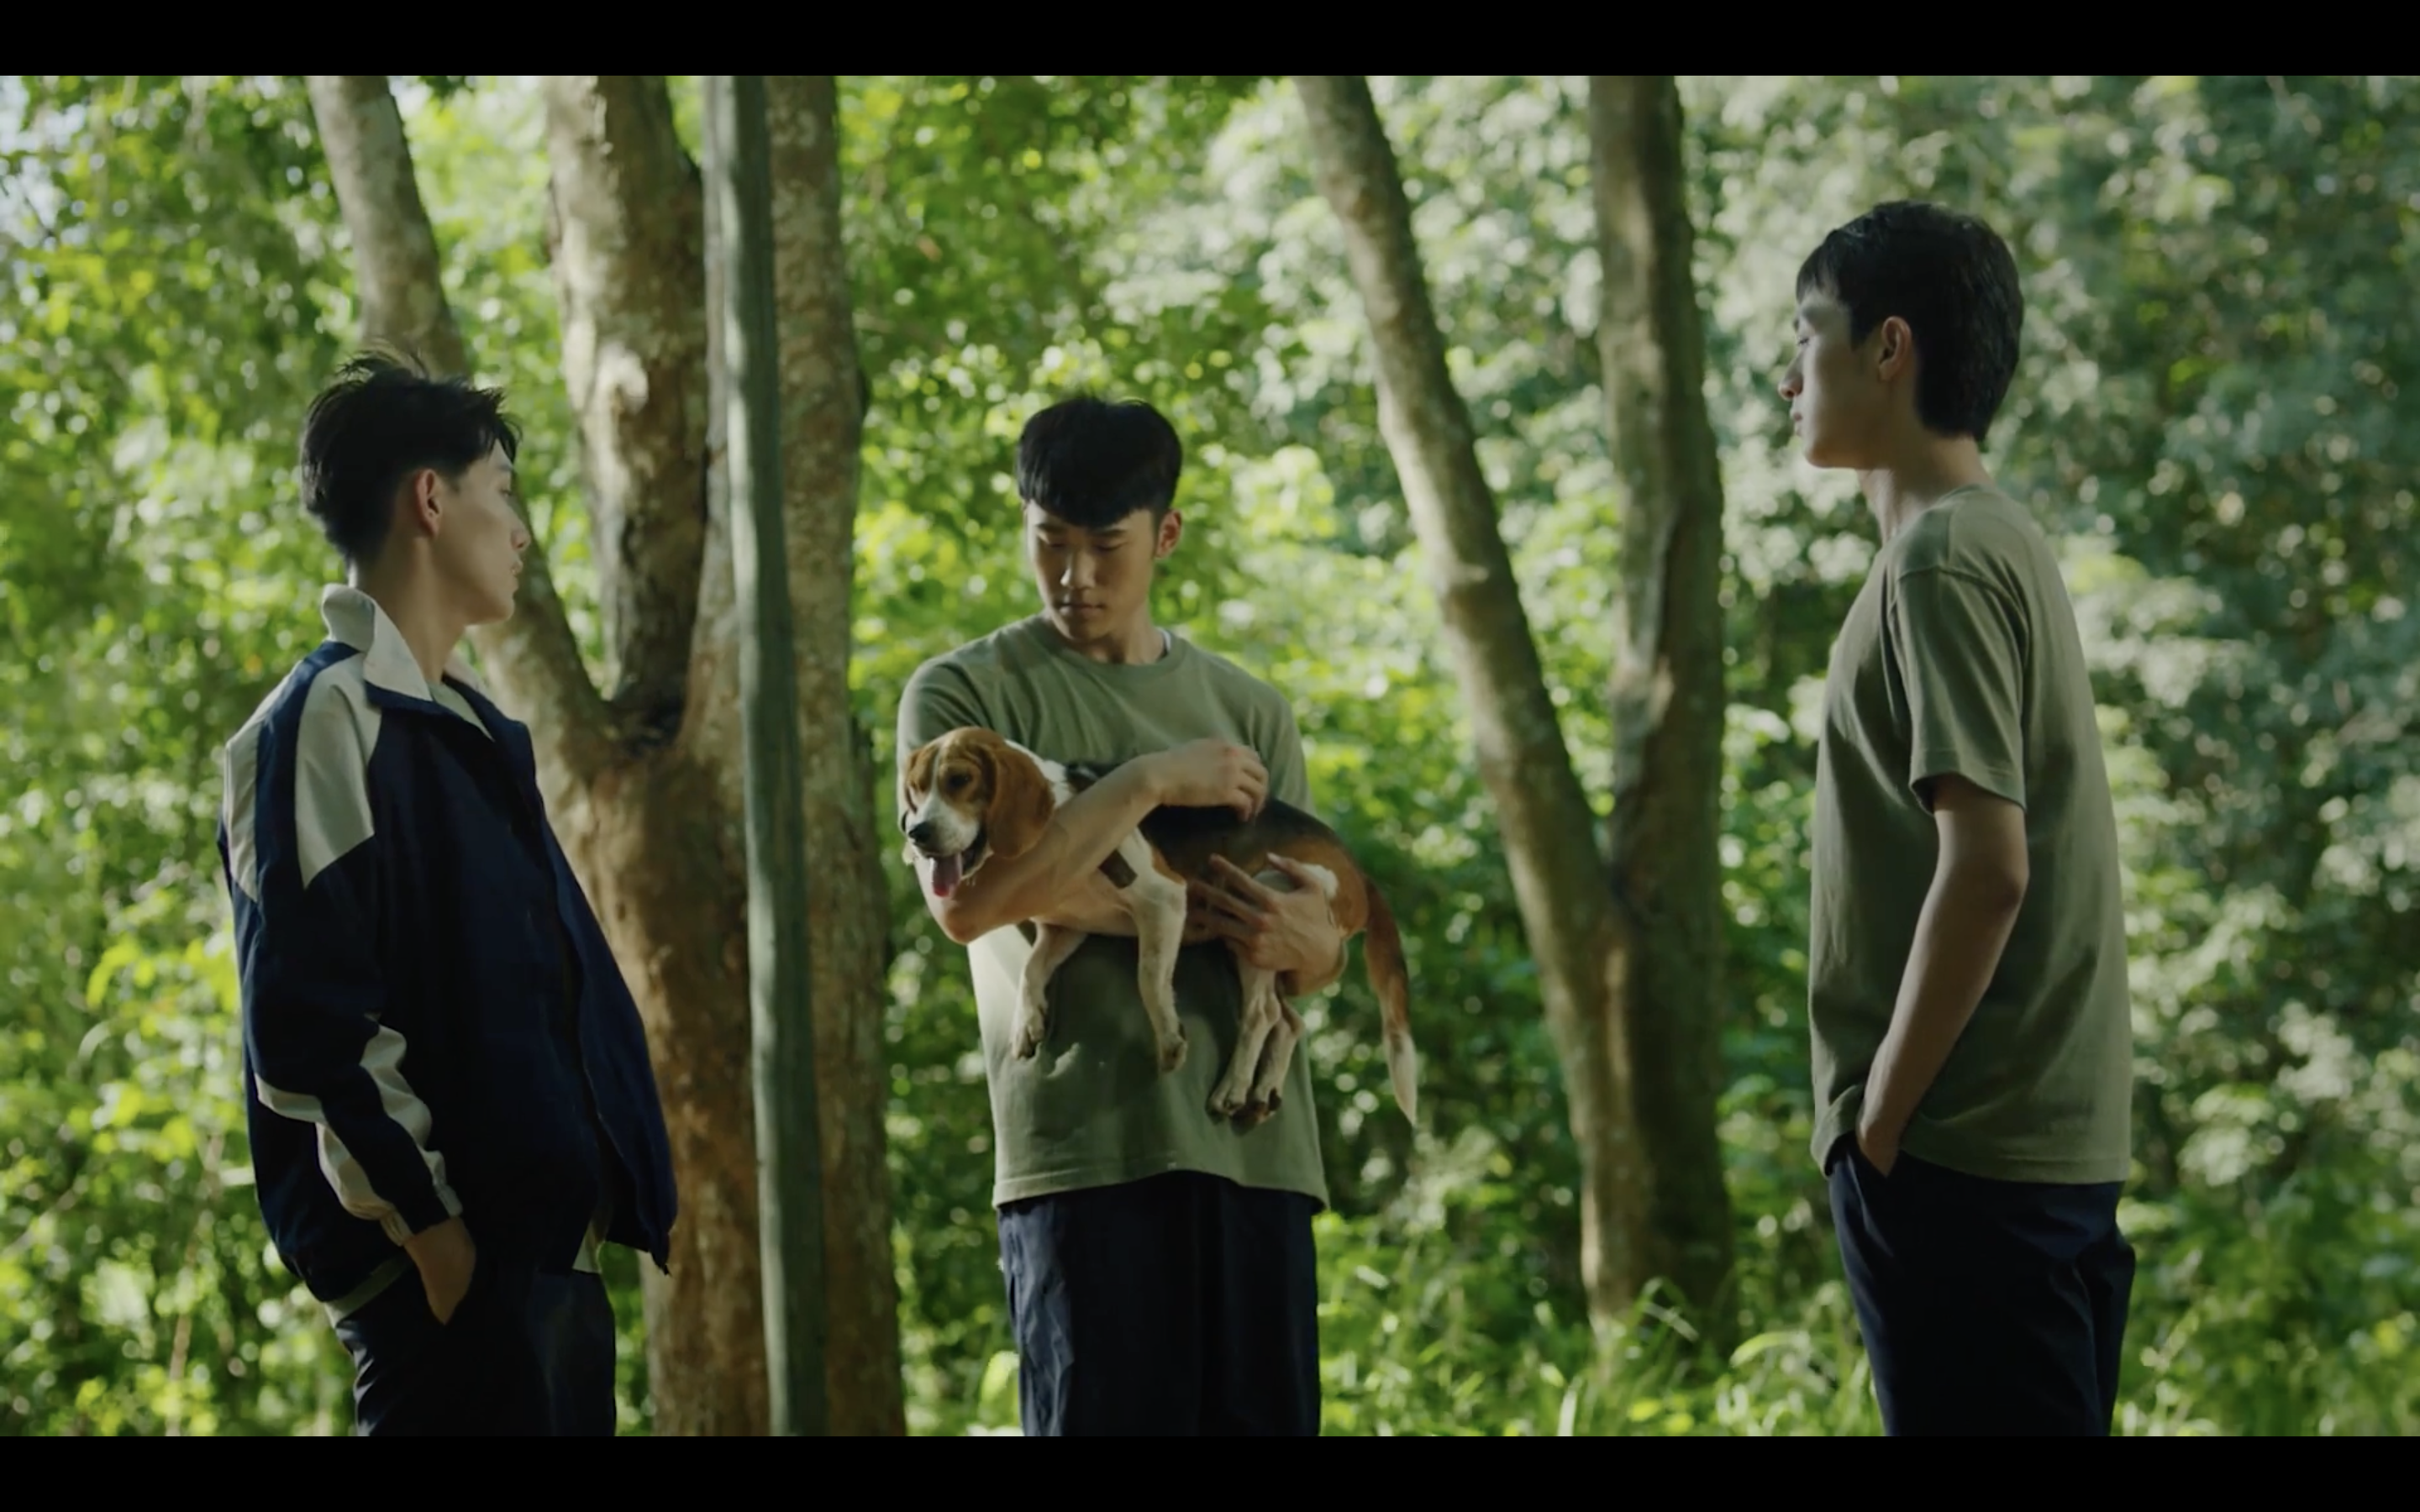 Three students in Breakout 13, one cradling his pet dog in his arms.